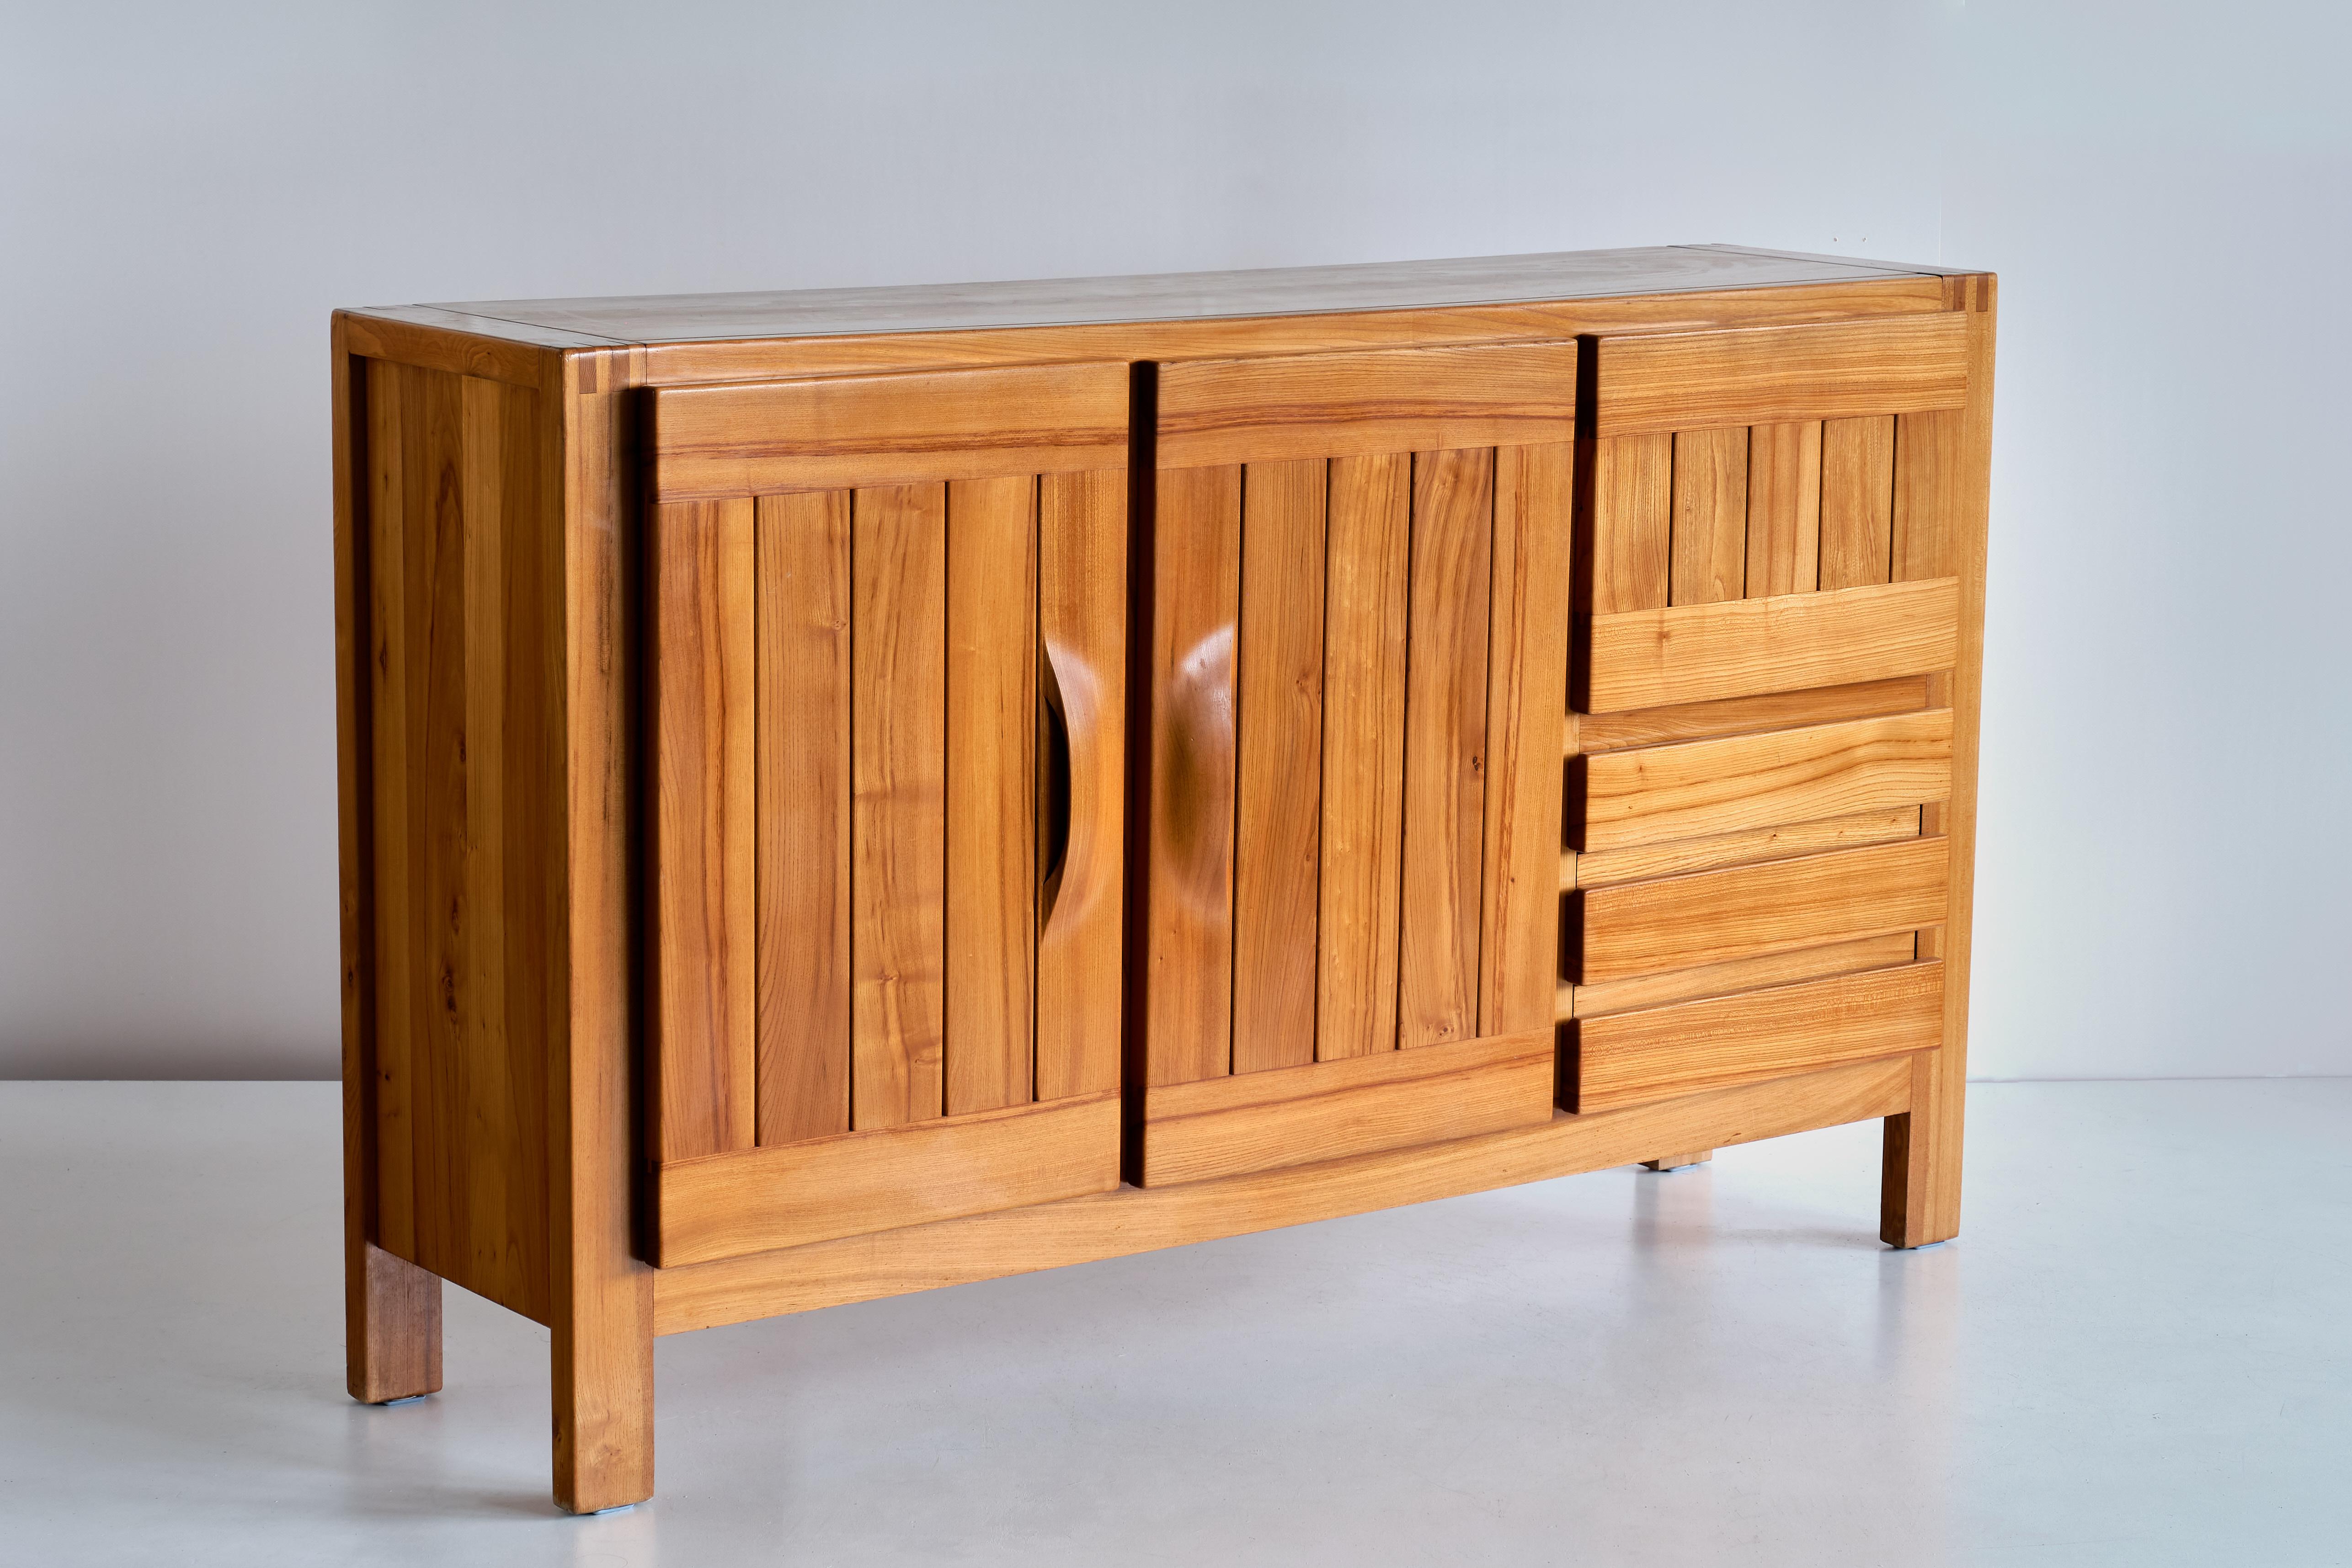 This impressive high sideboard was produced by Maison Regain in France in the late 1970s. The sideboard is made in solid elmwood and has a double door on the left with two beautifully crafted, sculptural handles. A convenient flap style opening and